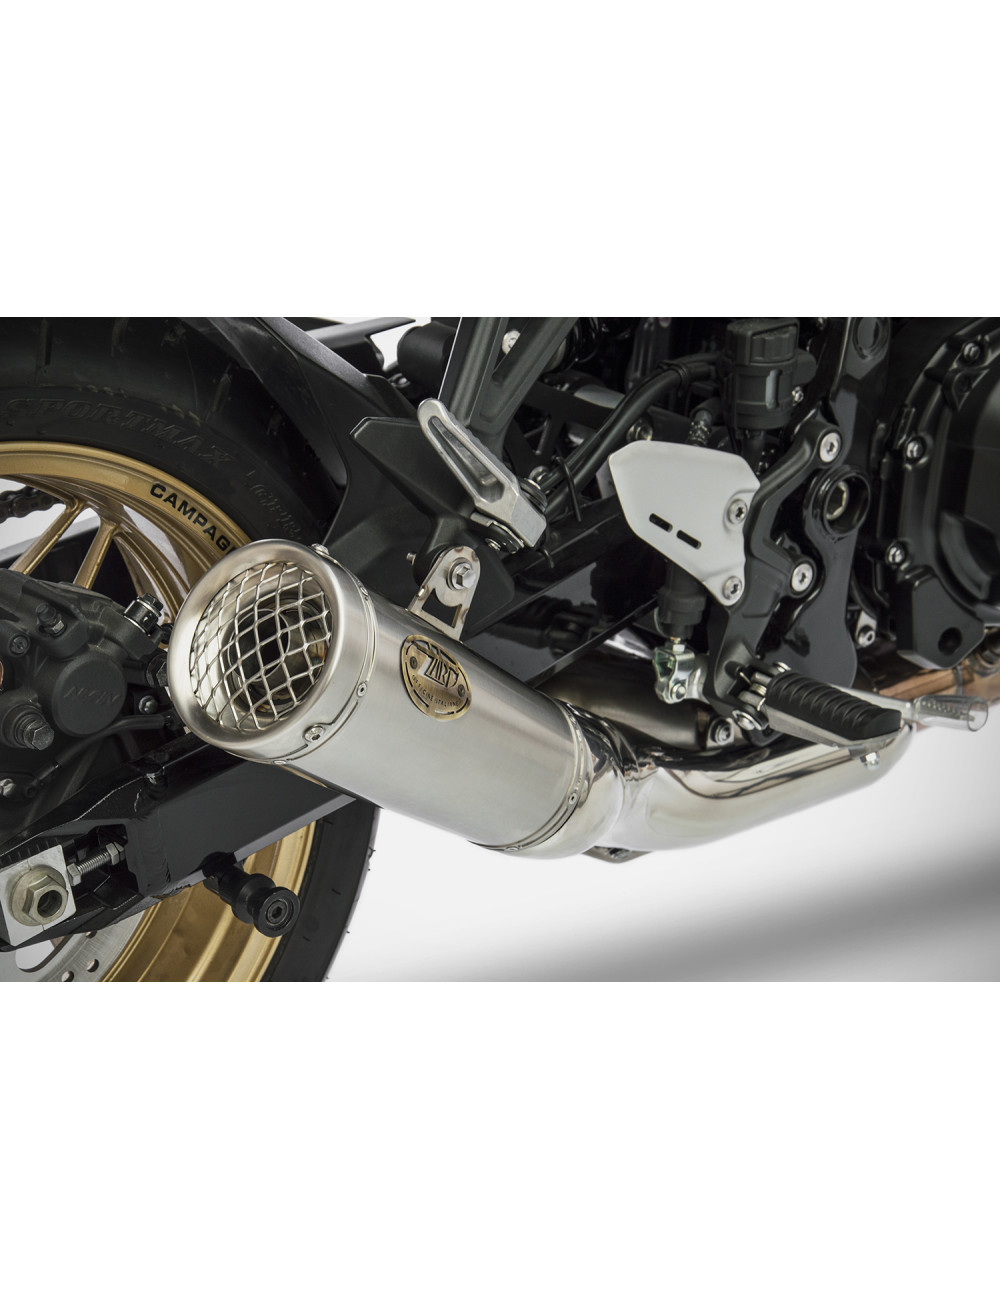 Z900 RS 18-20 Slip-On Exhaust